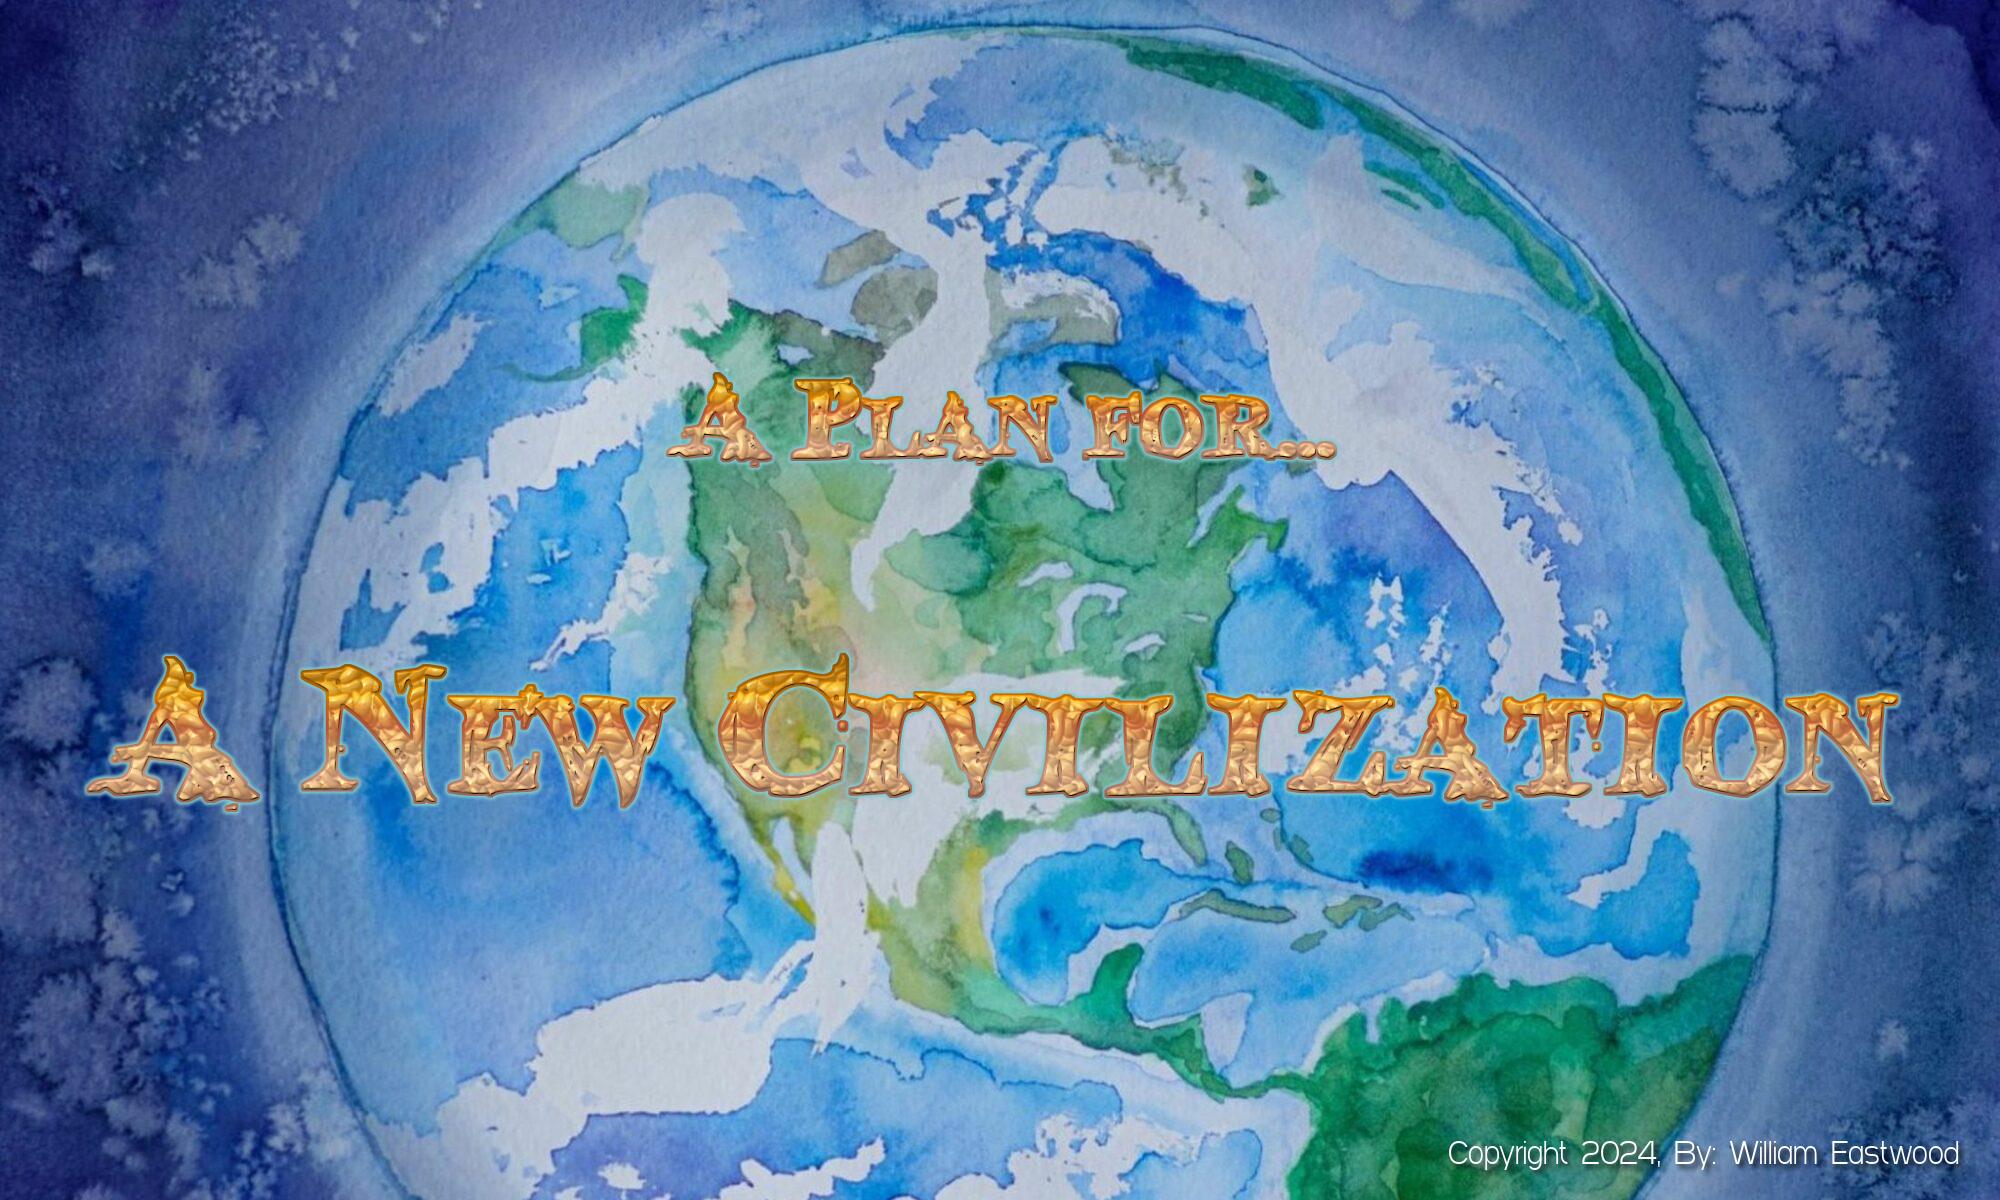 A Plan for a New Civilization (Based on Internal Science & International Philosophy) by William Eastwood Earth Network